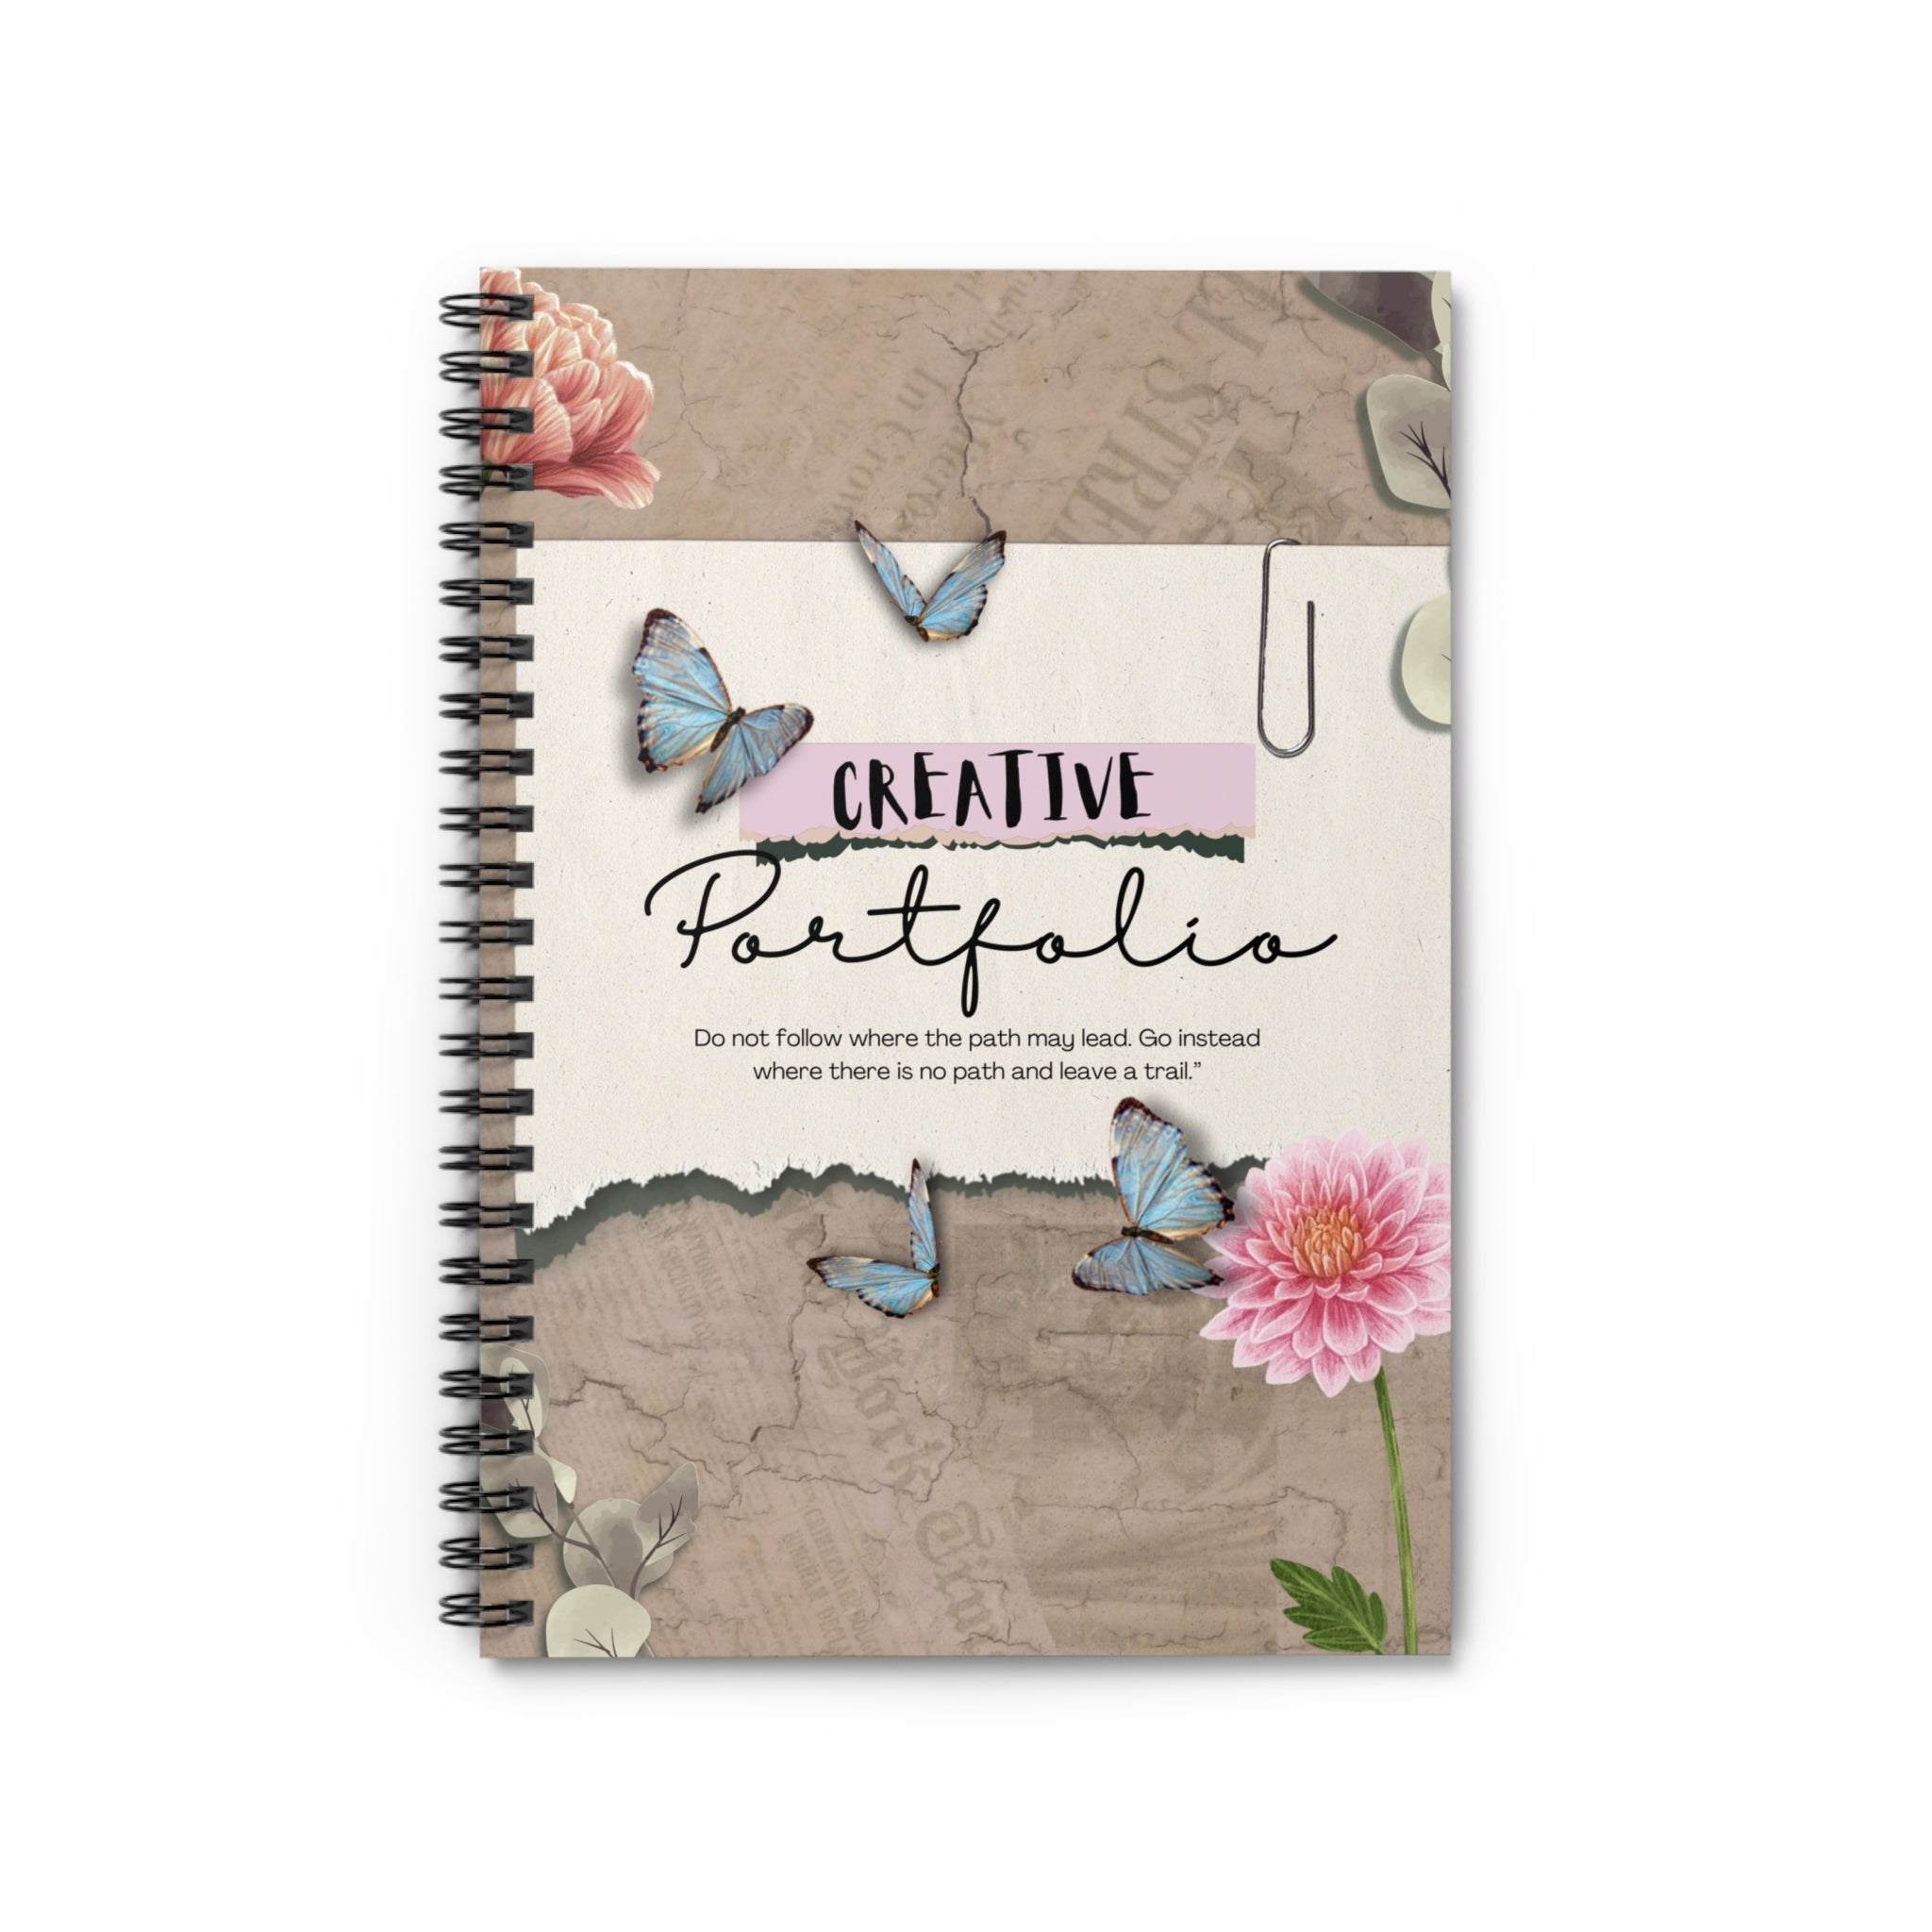 Creative Portfolio Spiral Notebook - Ruled Line Paper products Krazy Heart Designs Boutique   